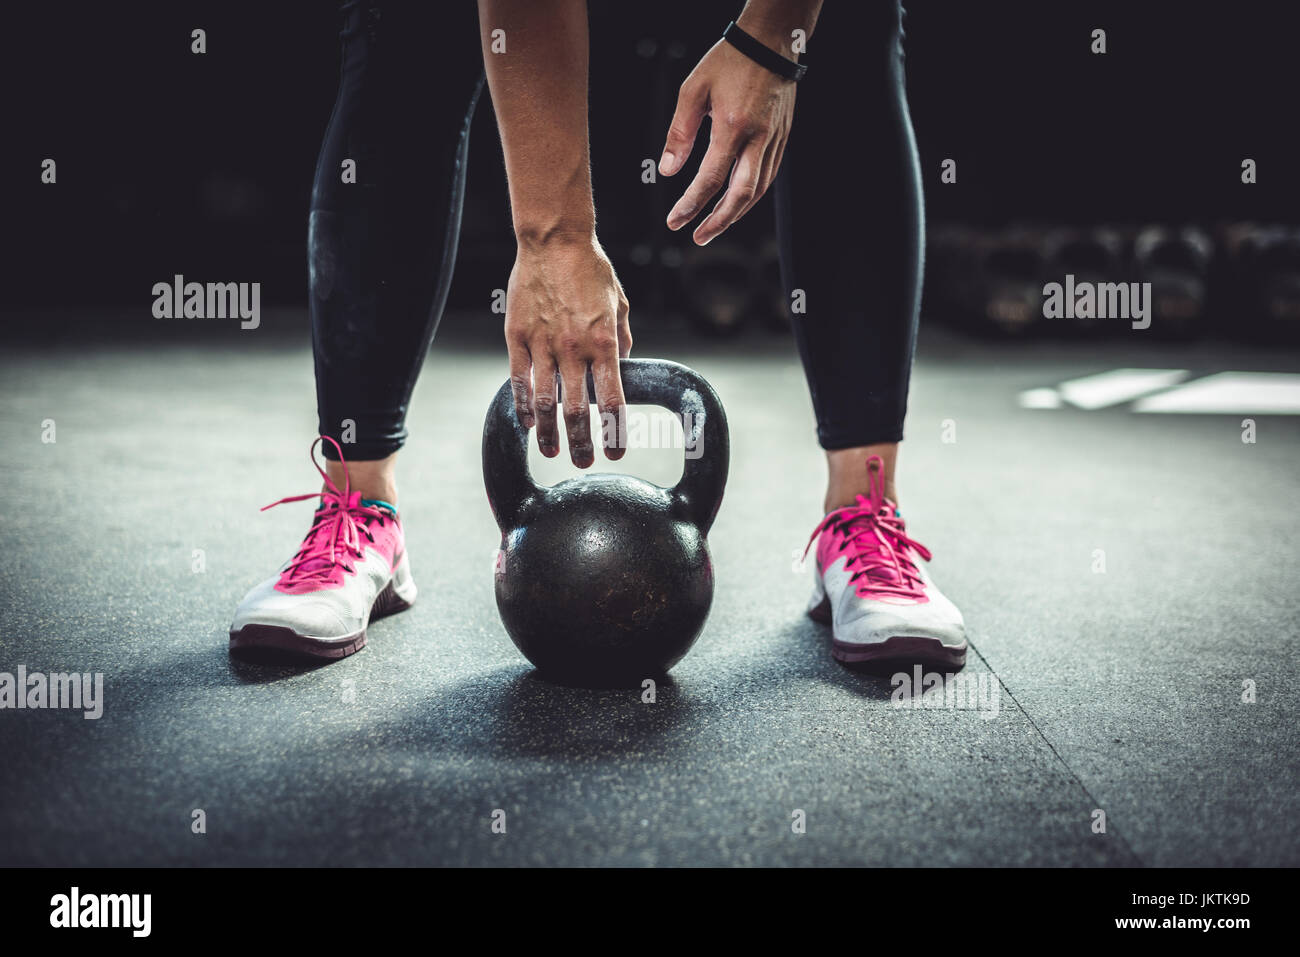 Woman inside a gym working out with a kettlebell. Stock Photo